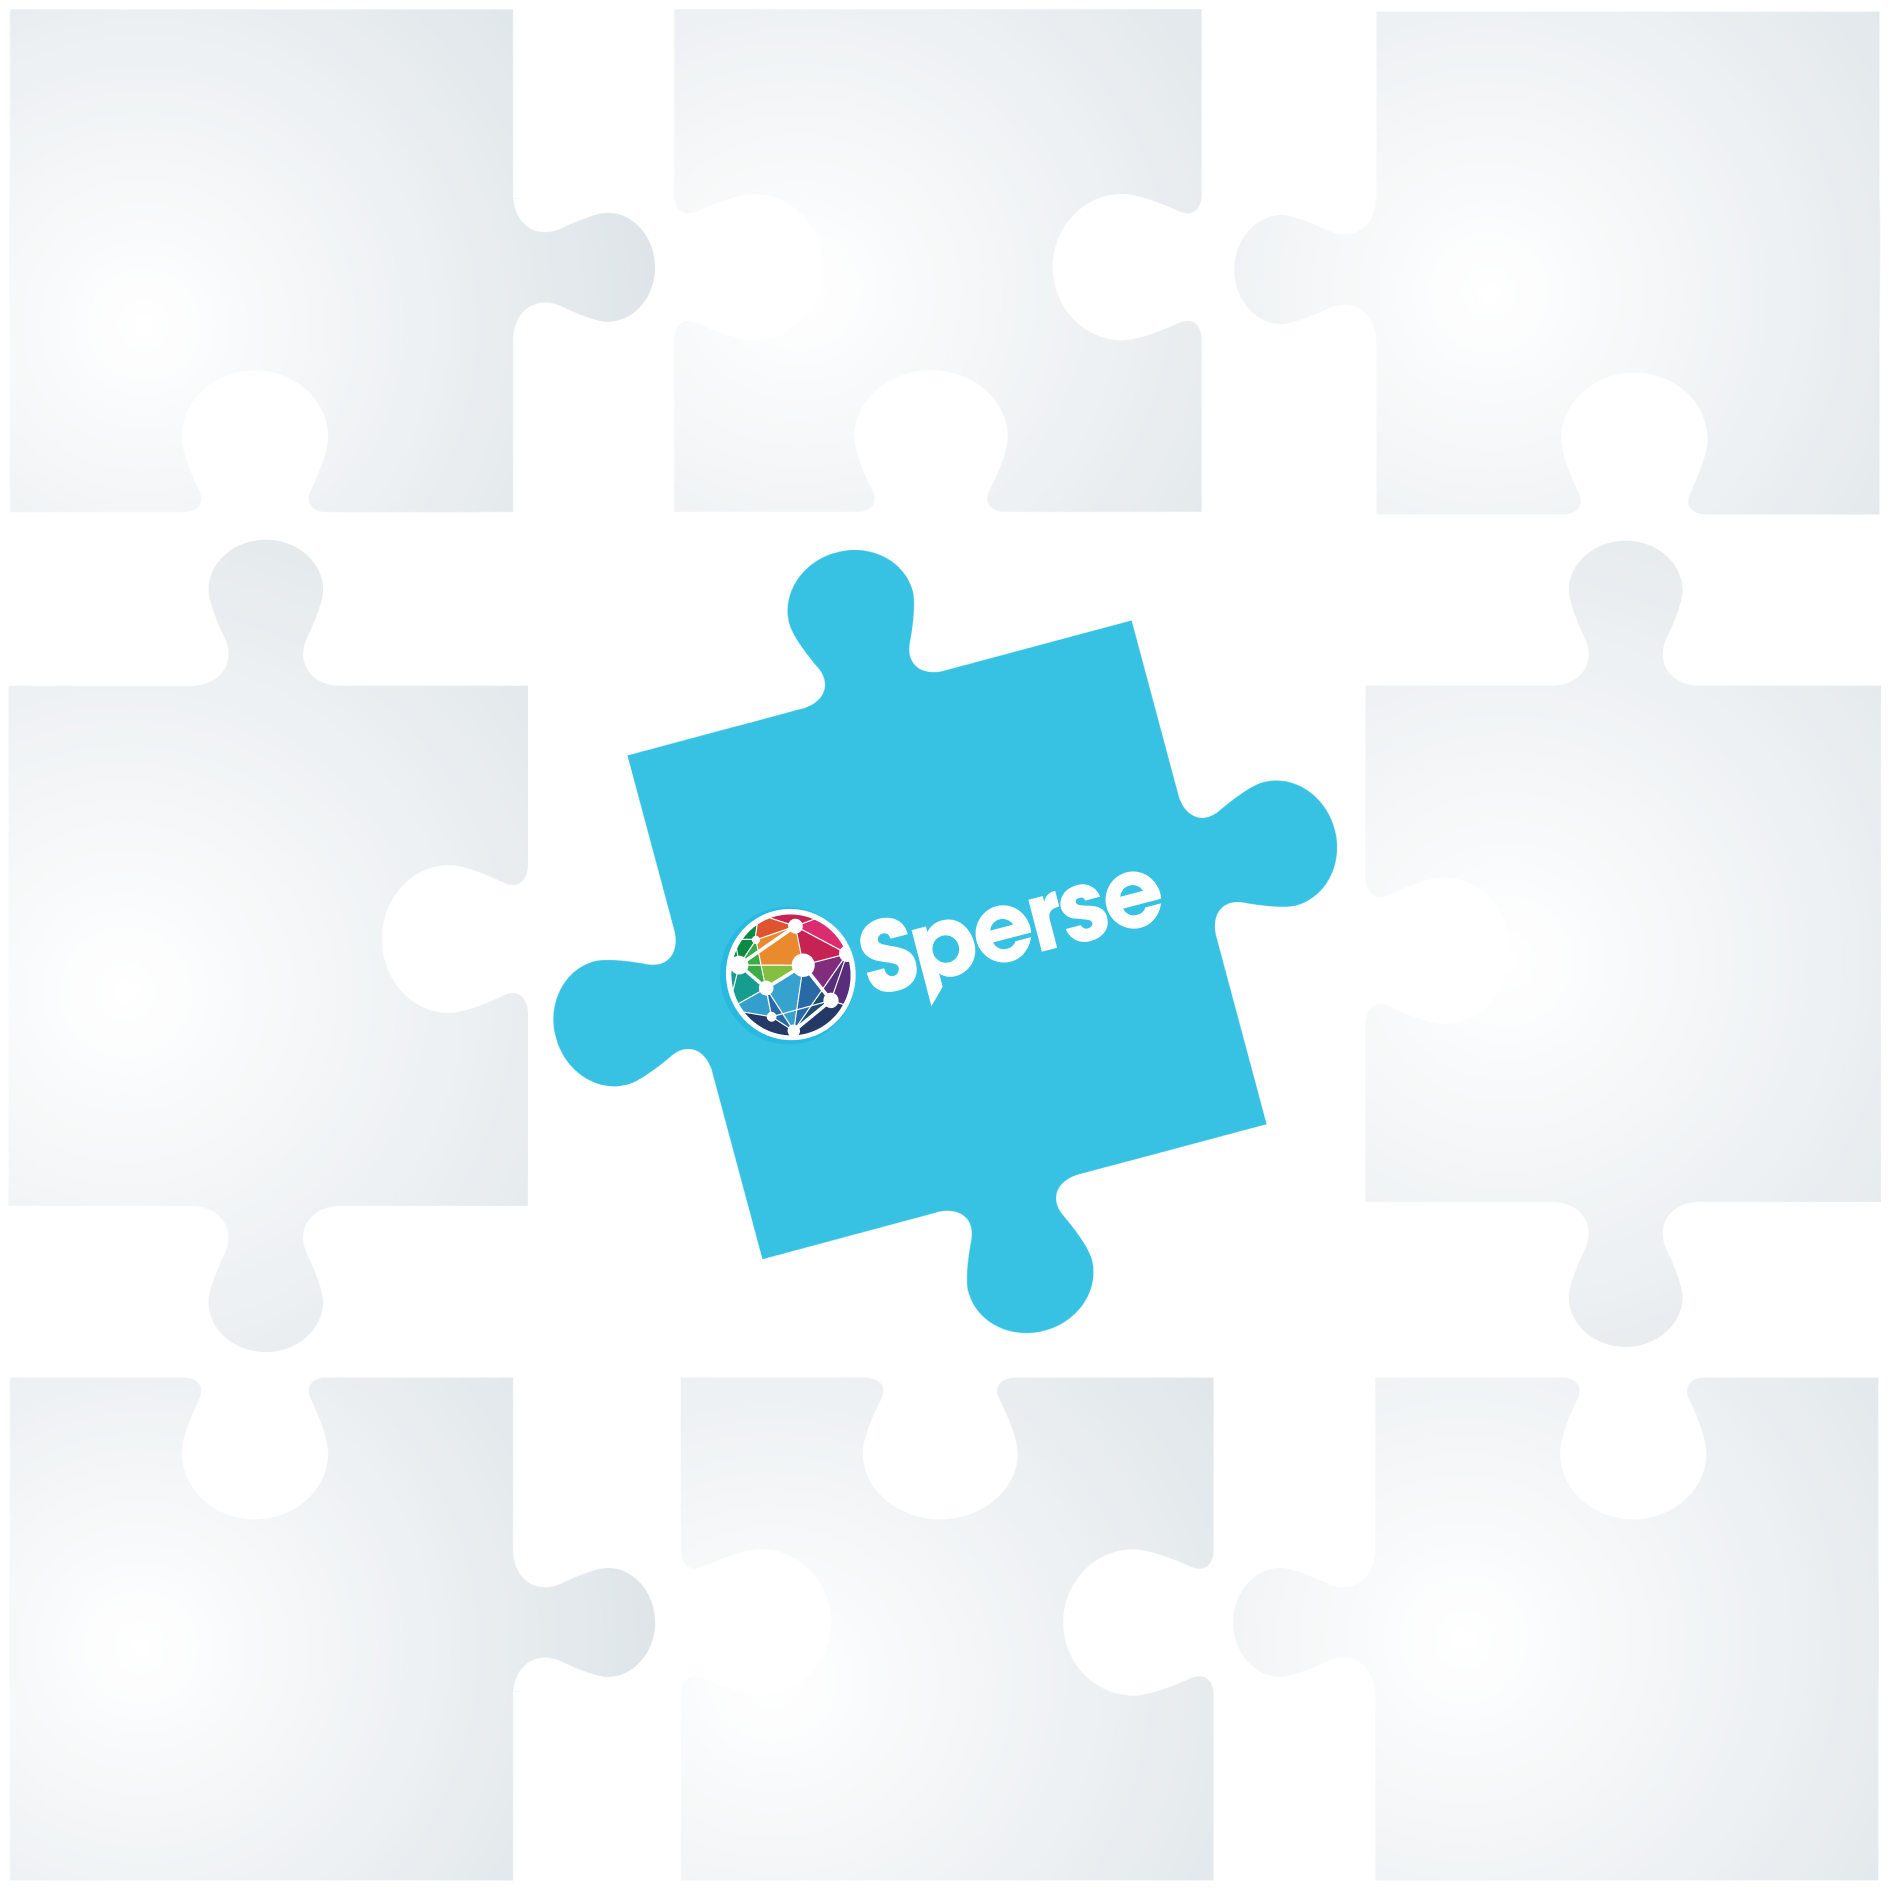 Sperse accelerate your business!